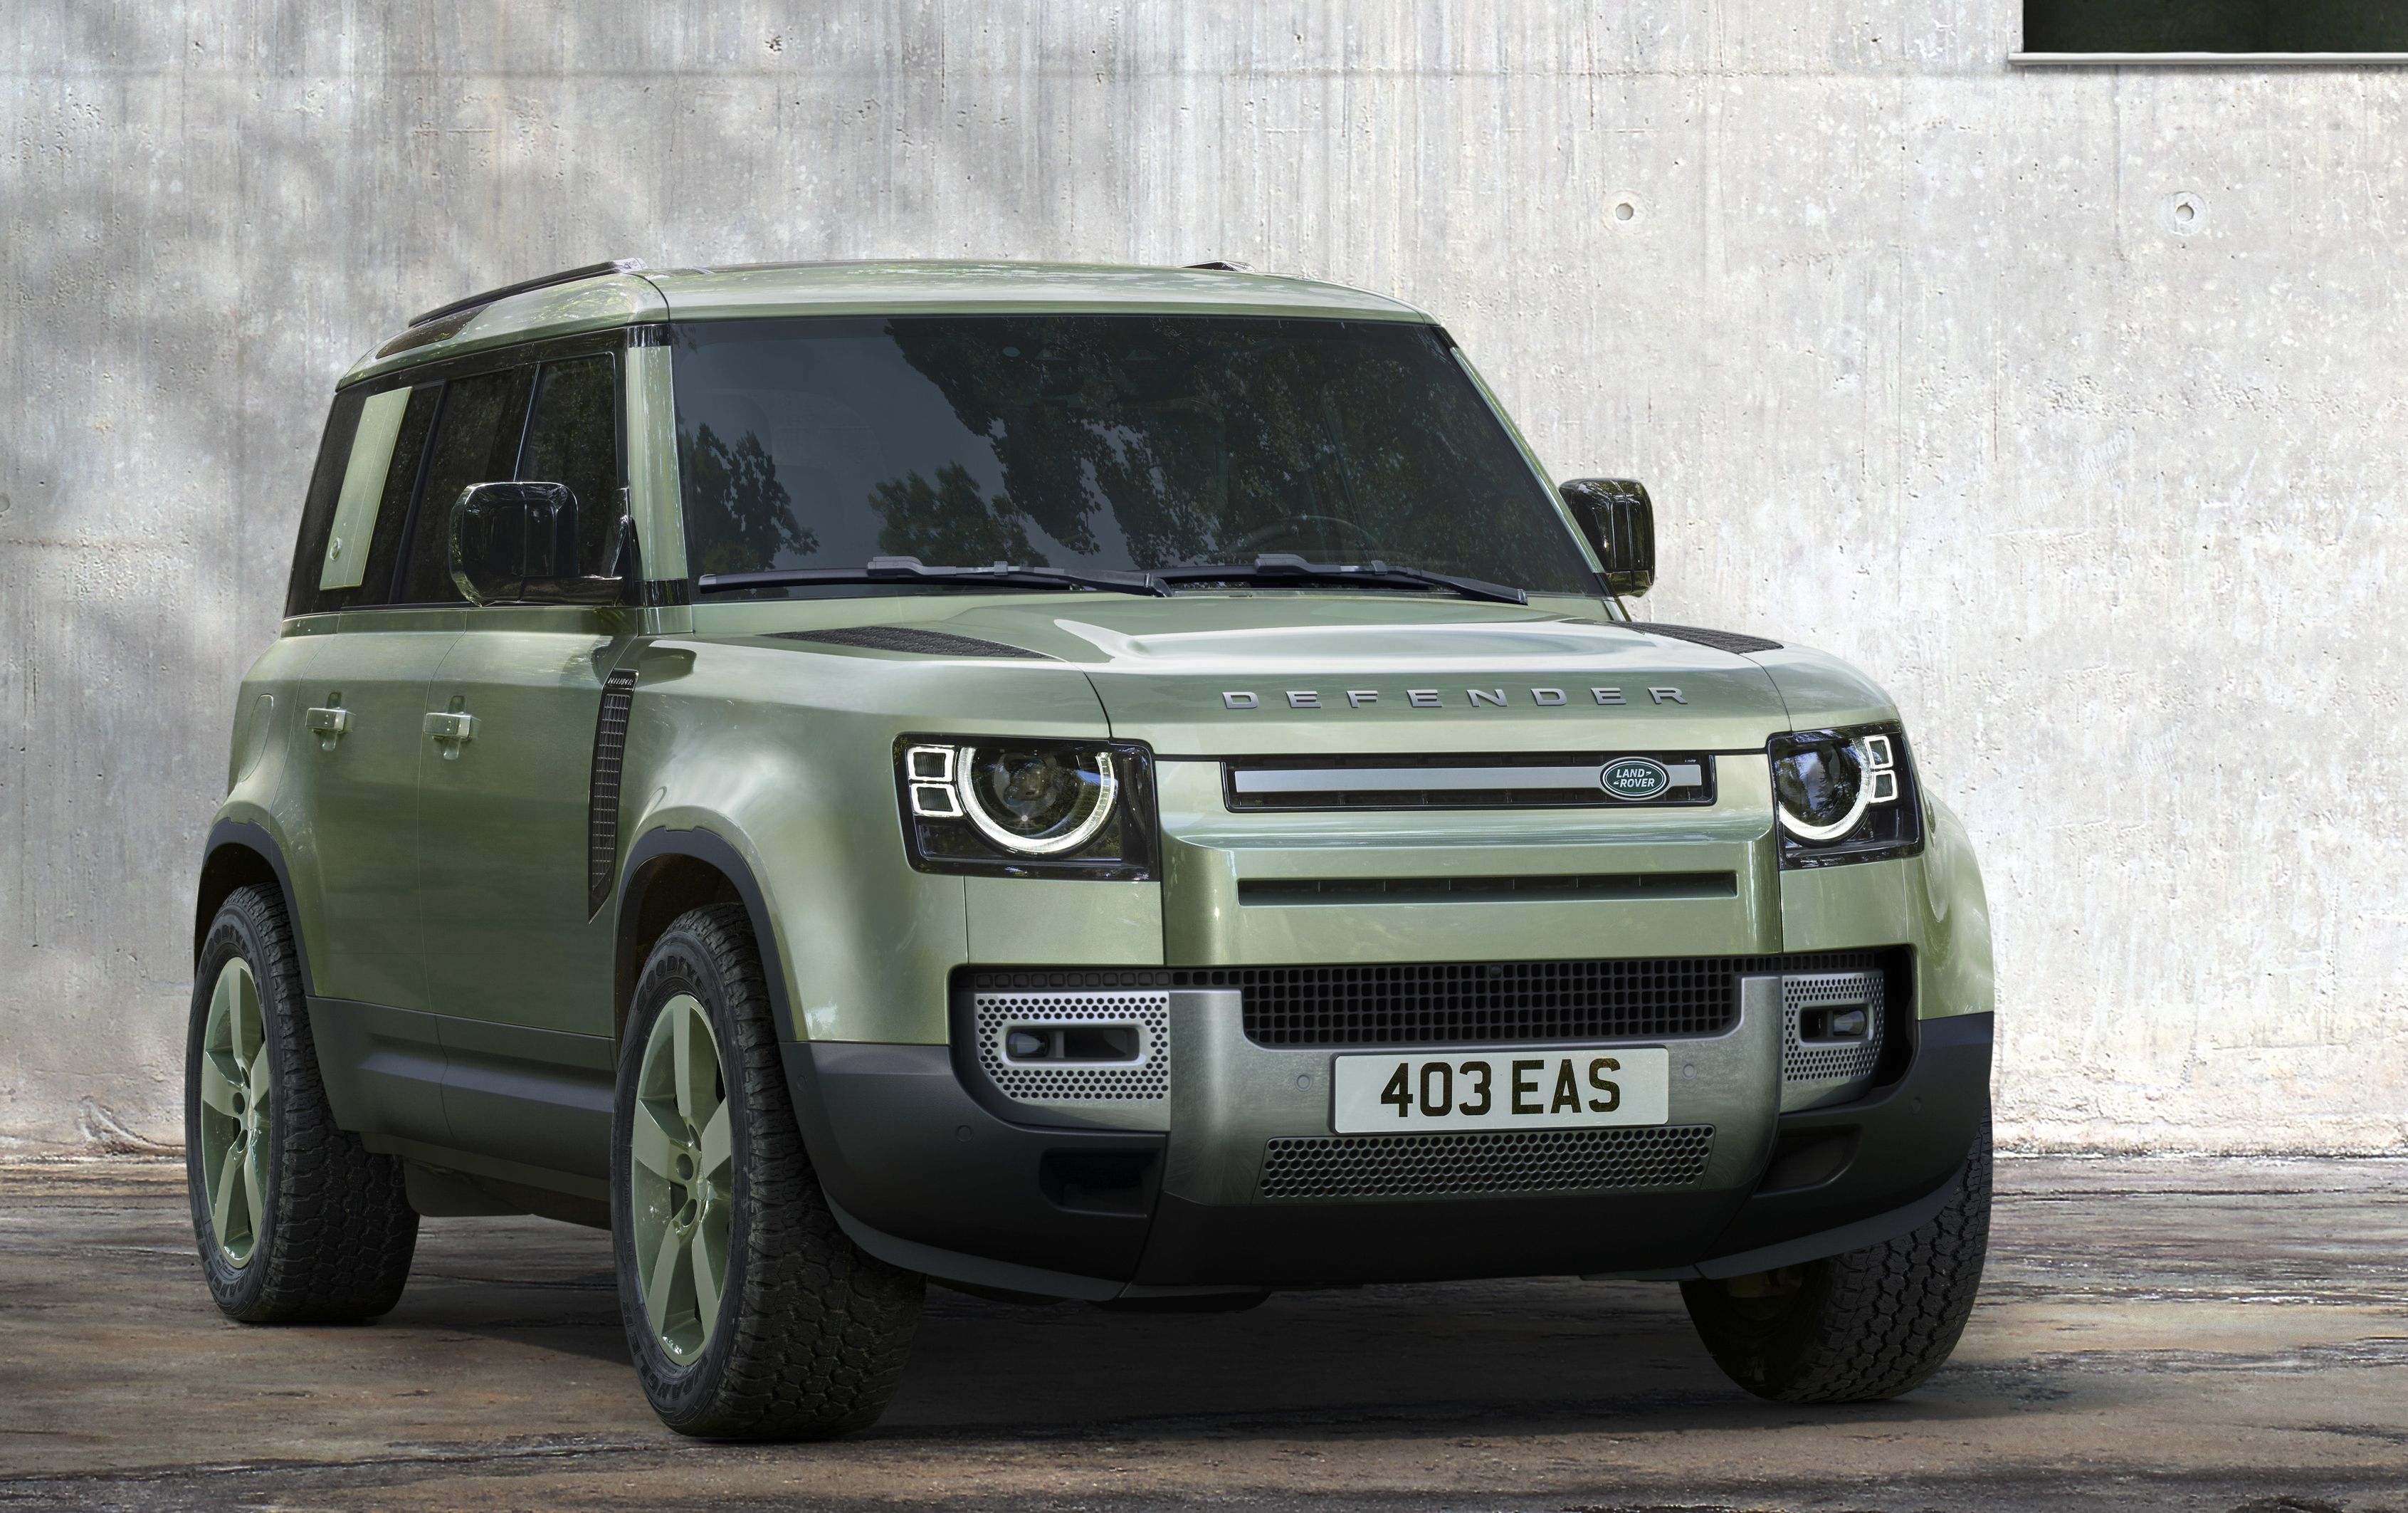 This Money Green Defender Pays Tribute to 75 Years of Land Rover